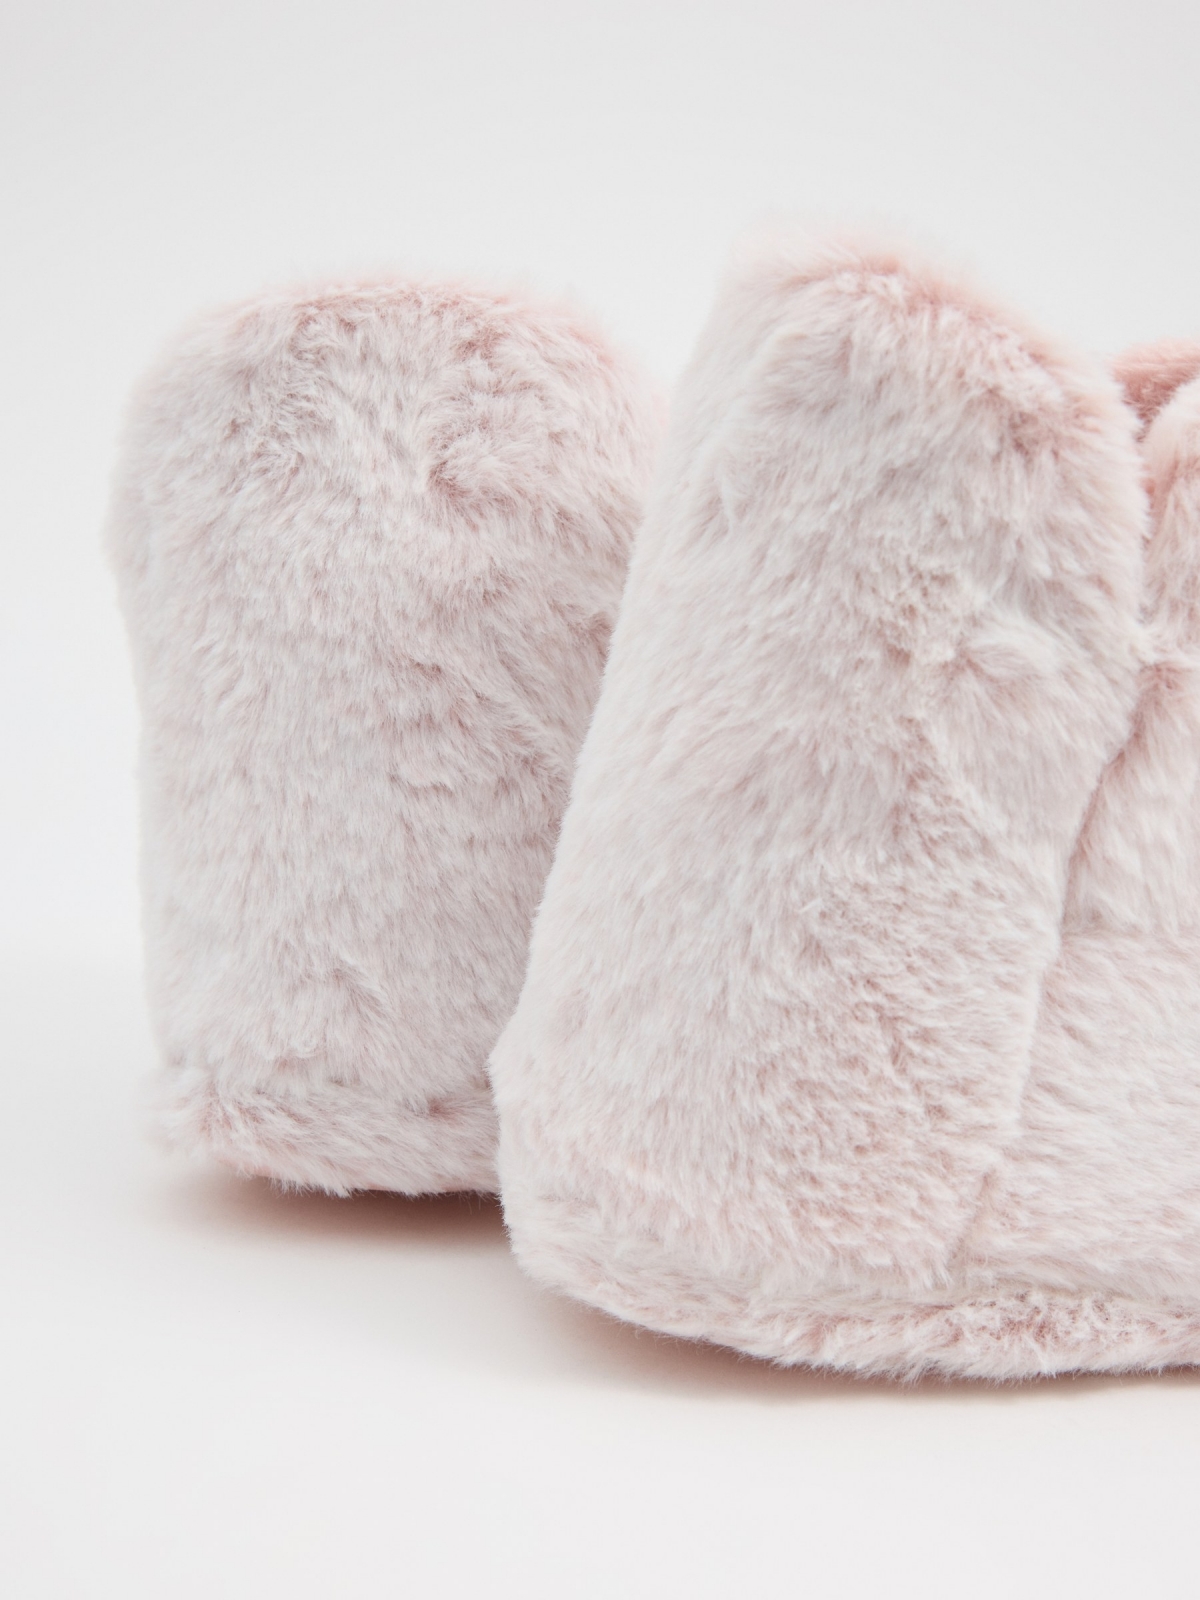 Bunny boots home slippers pink detail view